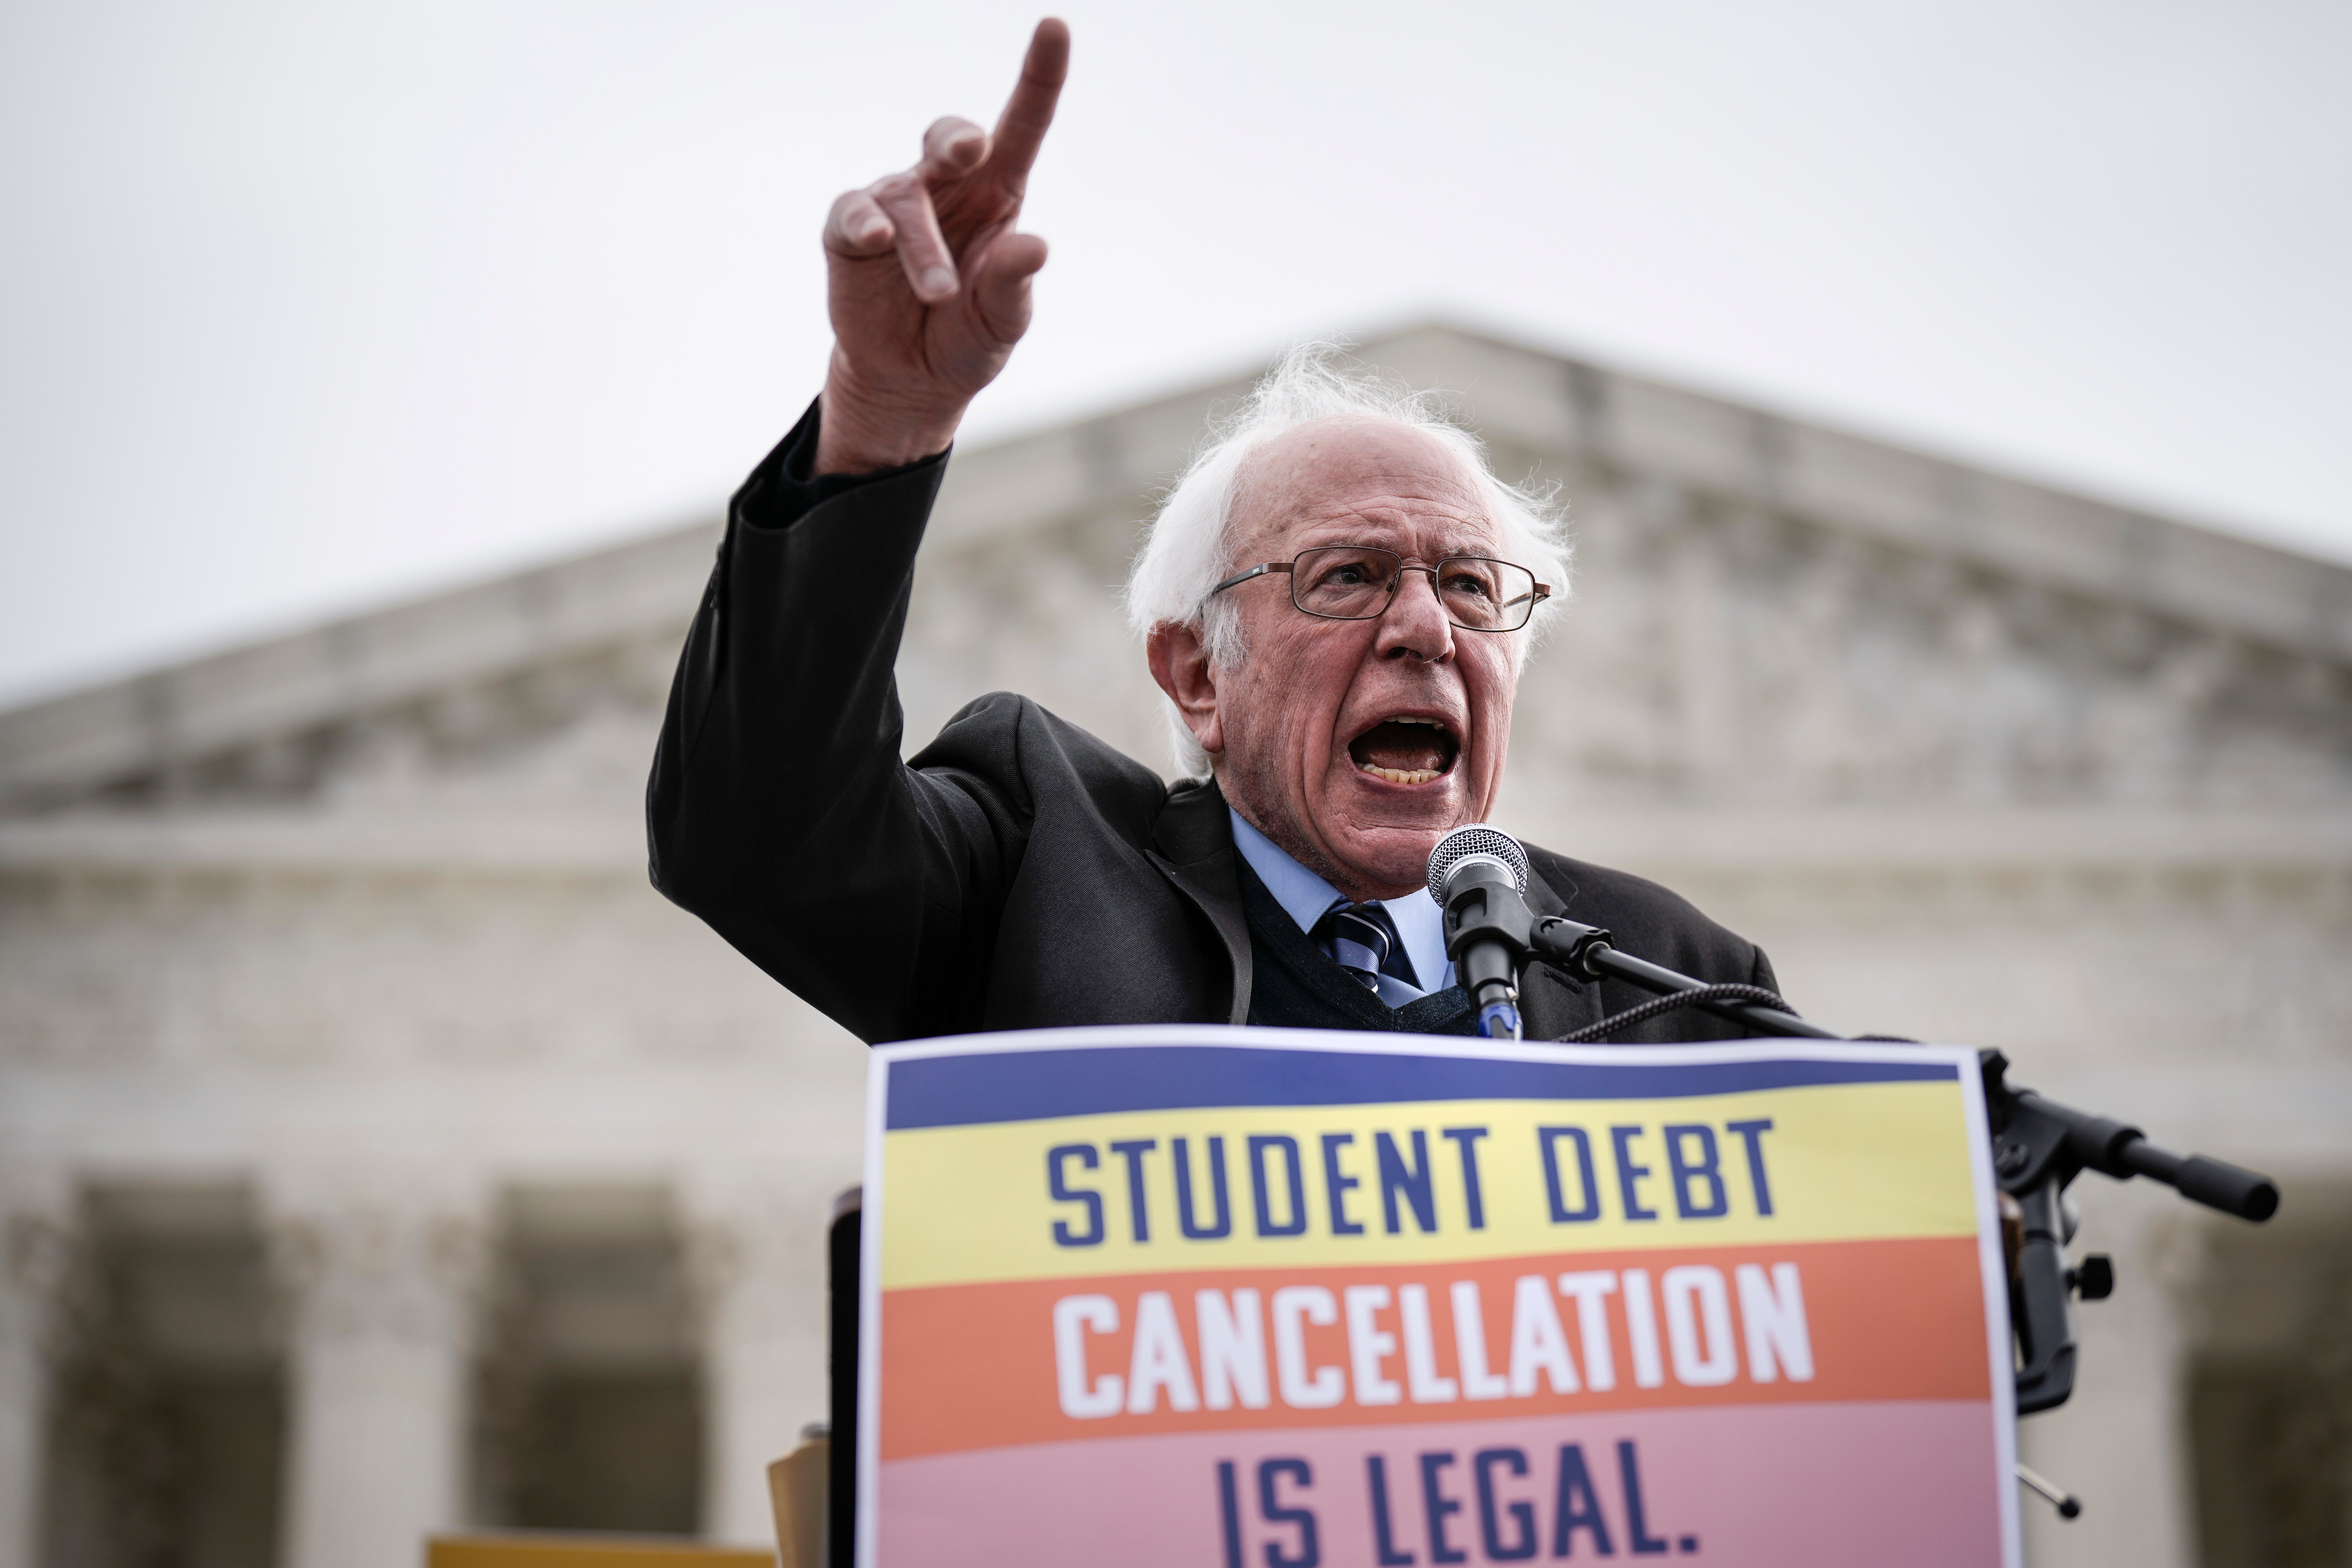 Bernie Sanders rallies outside the US Supreme Court on 28 February to support student loan debt cancellation plans.